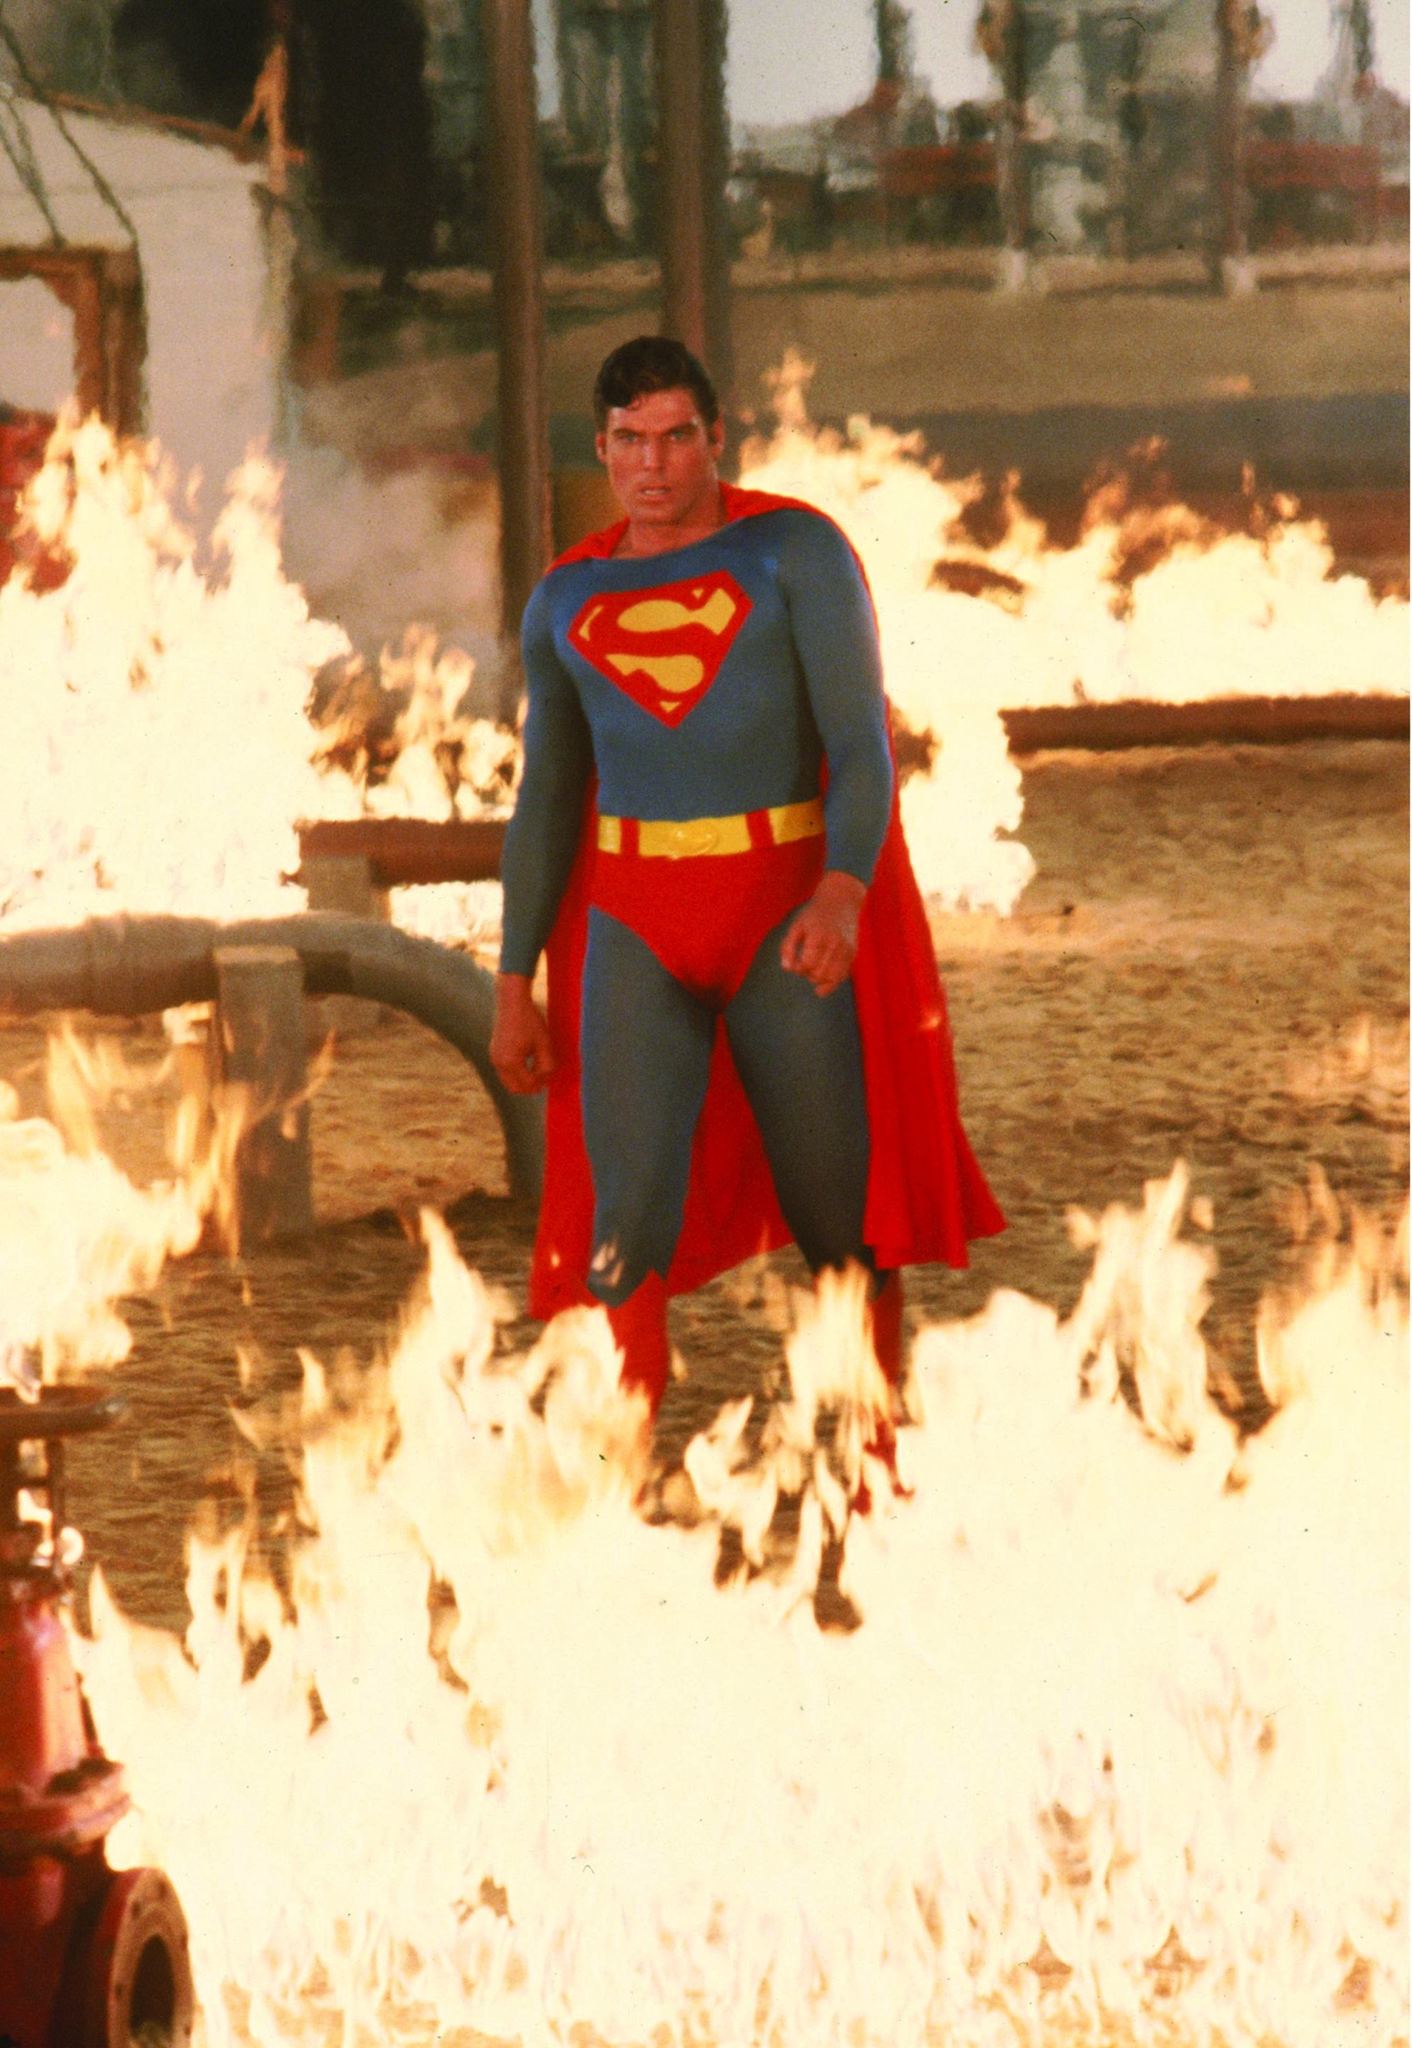 Still of Christopher Reeve in Superman III (1983)